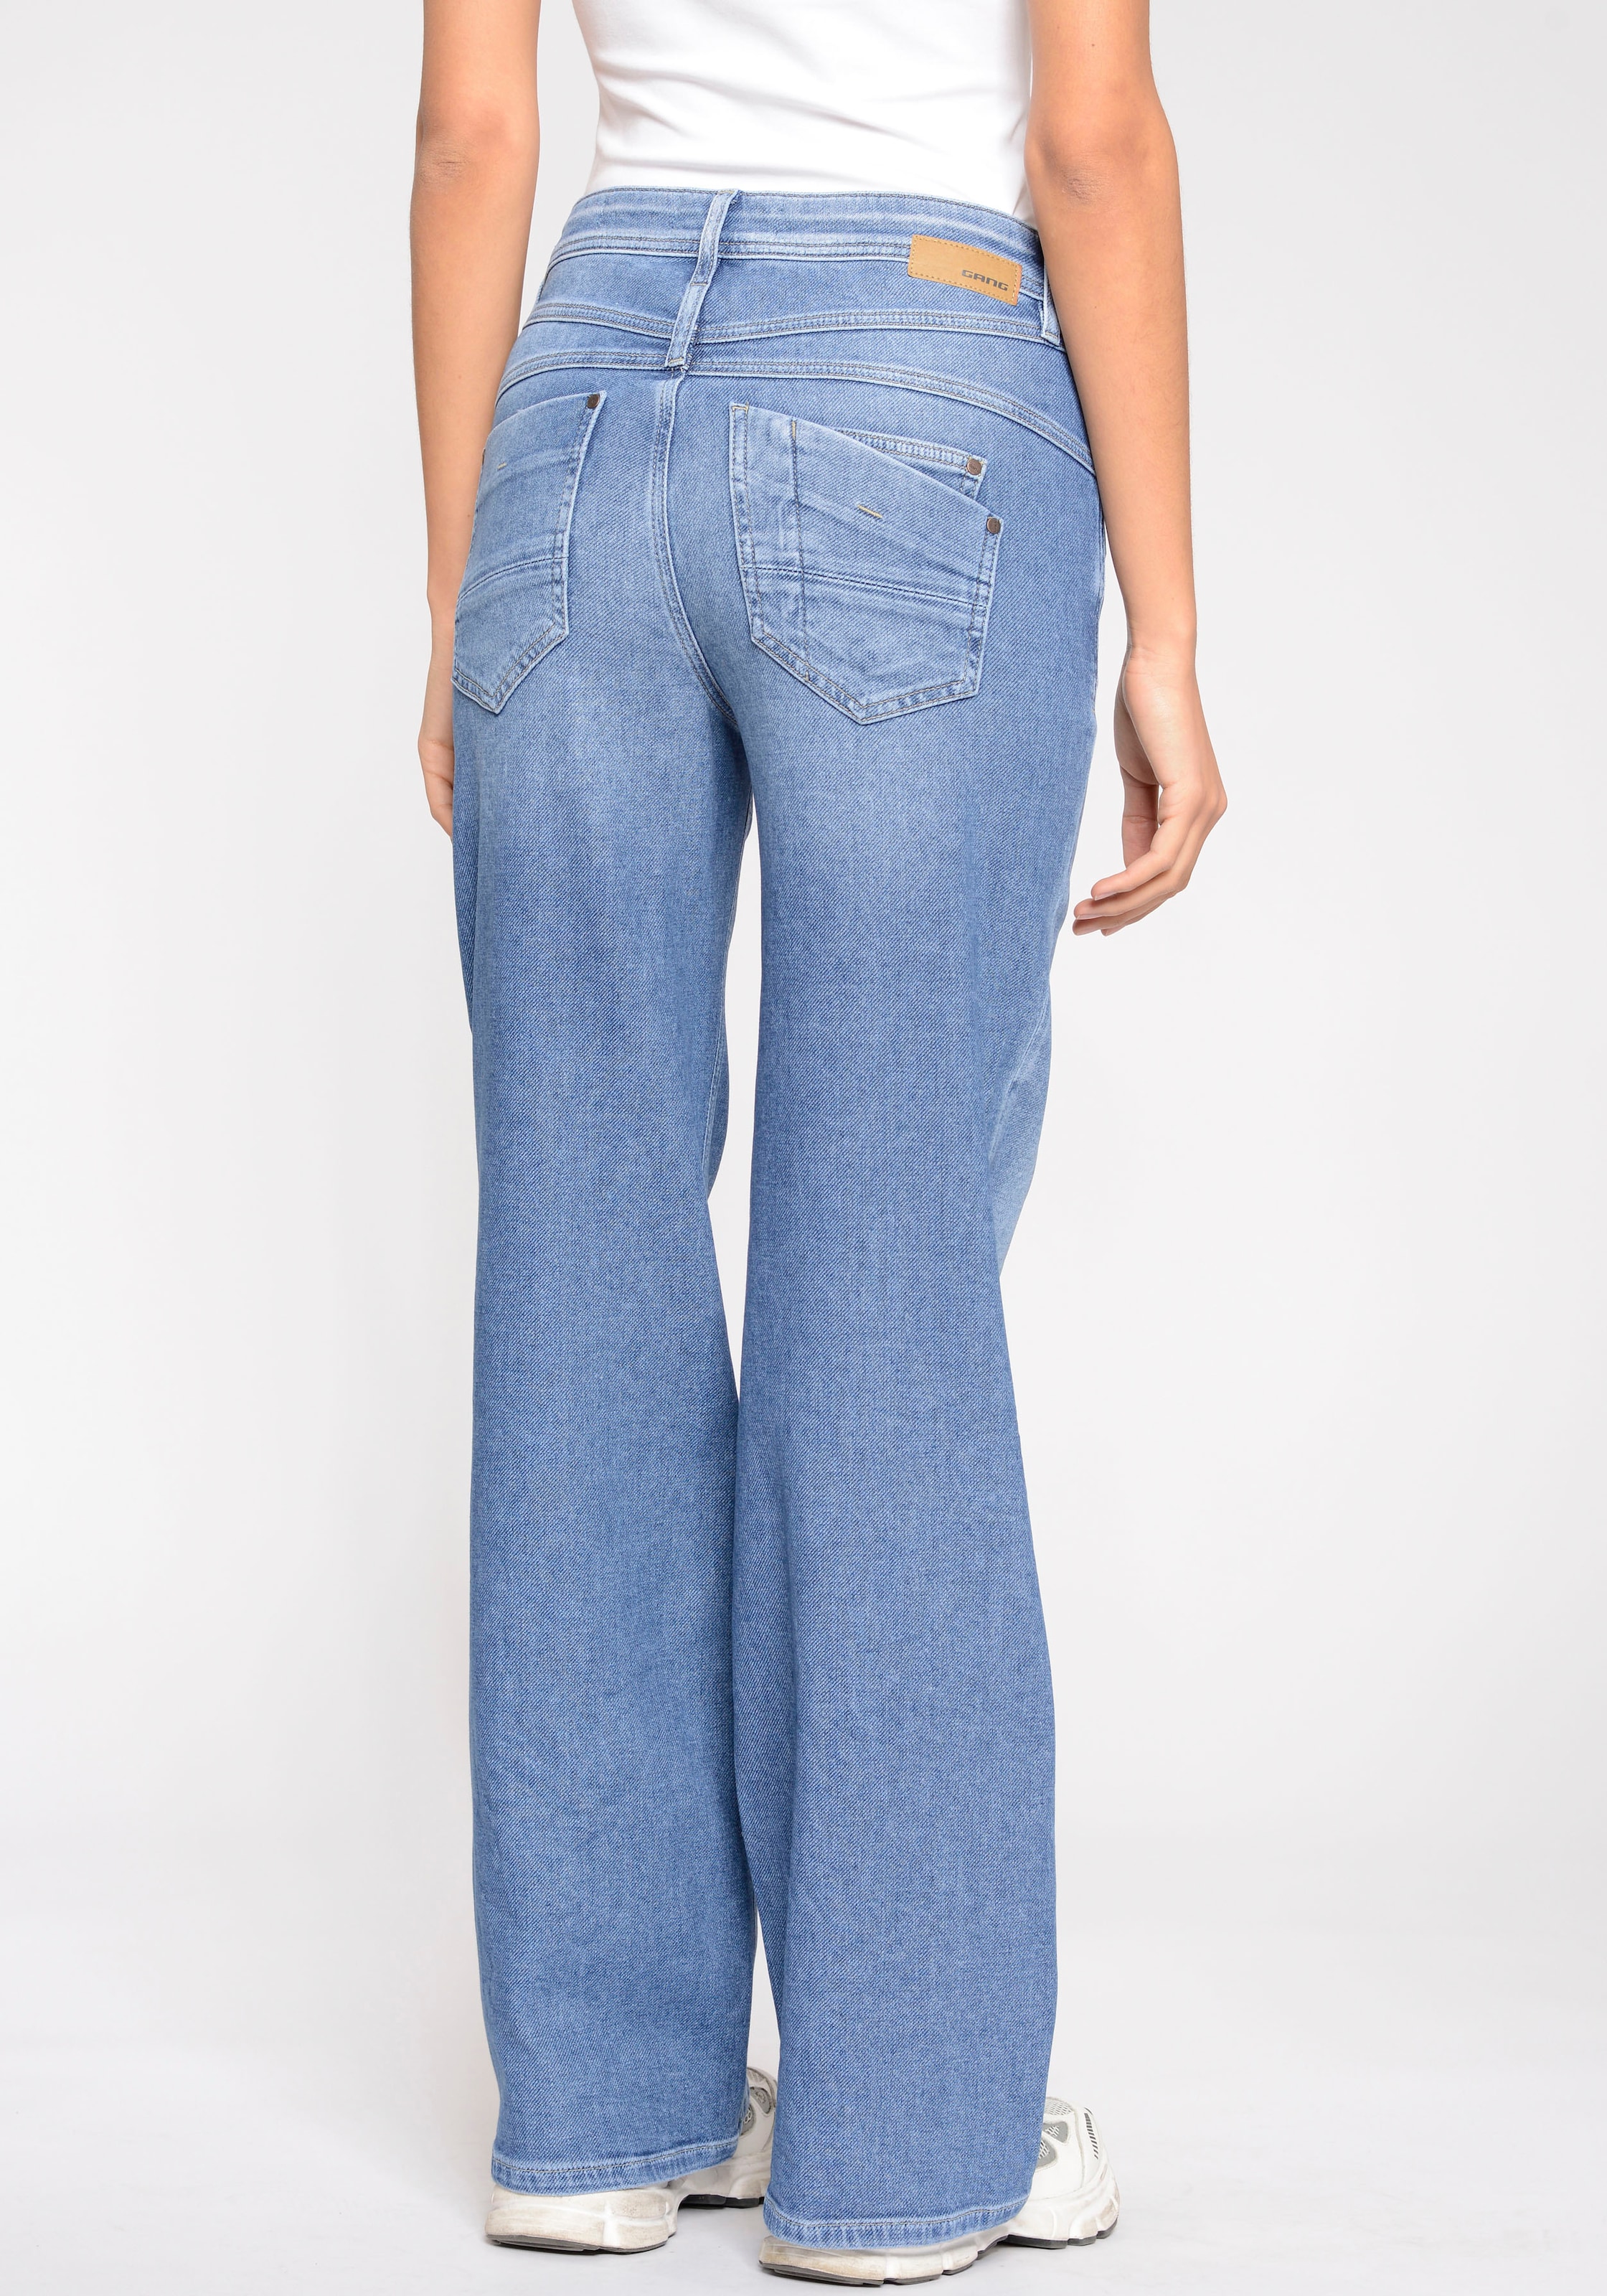 ♕ GANG Jeans »94Amelie Wide« bei Weite